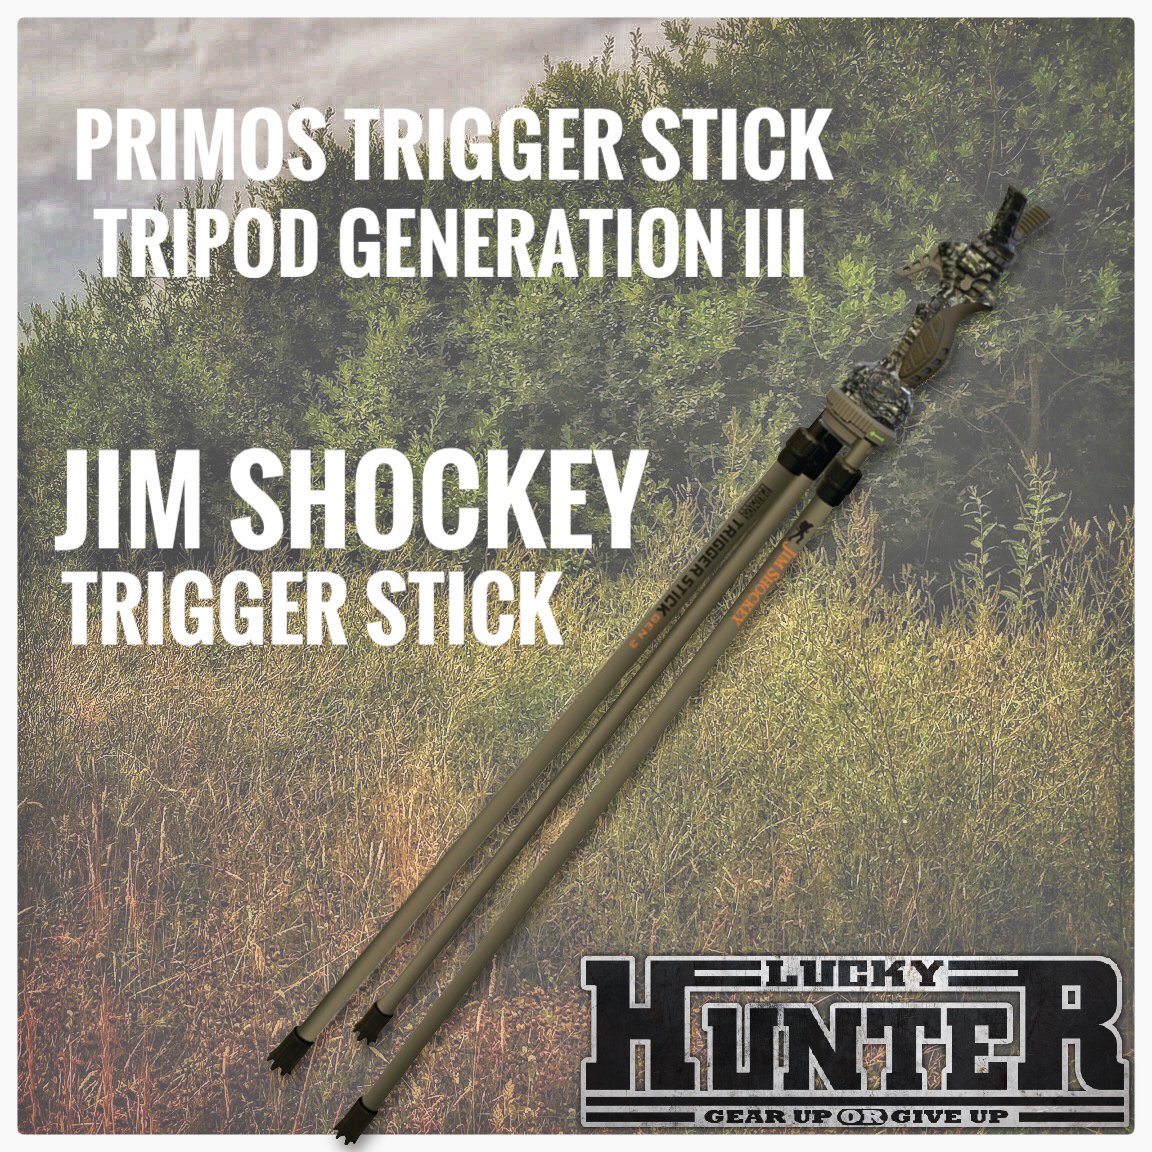 Jim Shockey Primos Trigger Stick- Generation III. Ideal trigger stick for both shooting game and shooting photos! Stable base no matter the surface. bit.ly/gen3trigger #triggerstick #safeshooting #photography #hunting #luckyhunter #primos